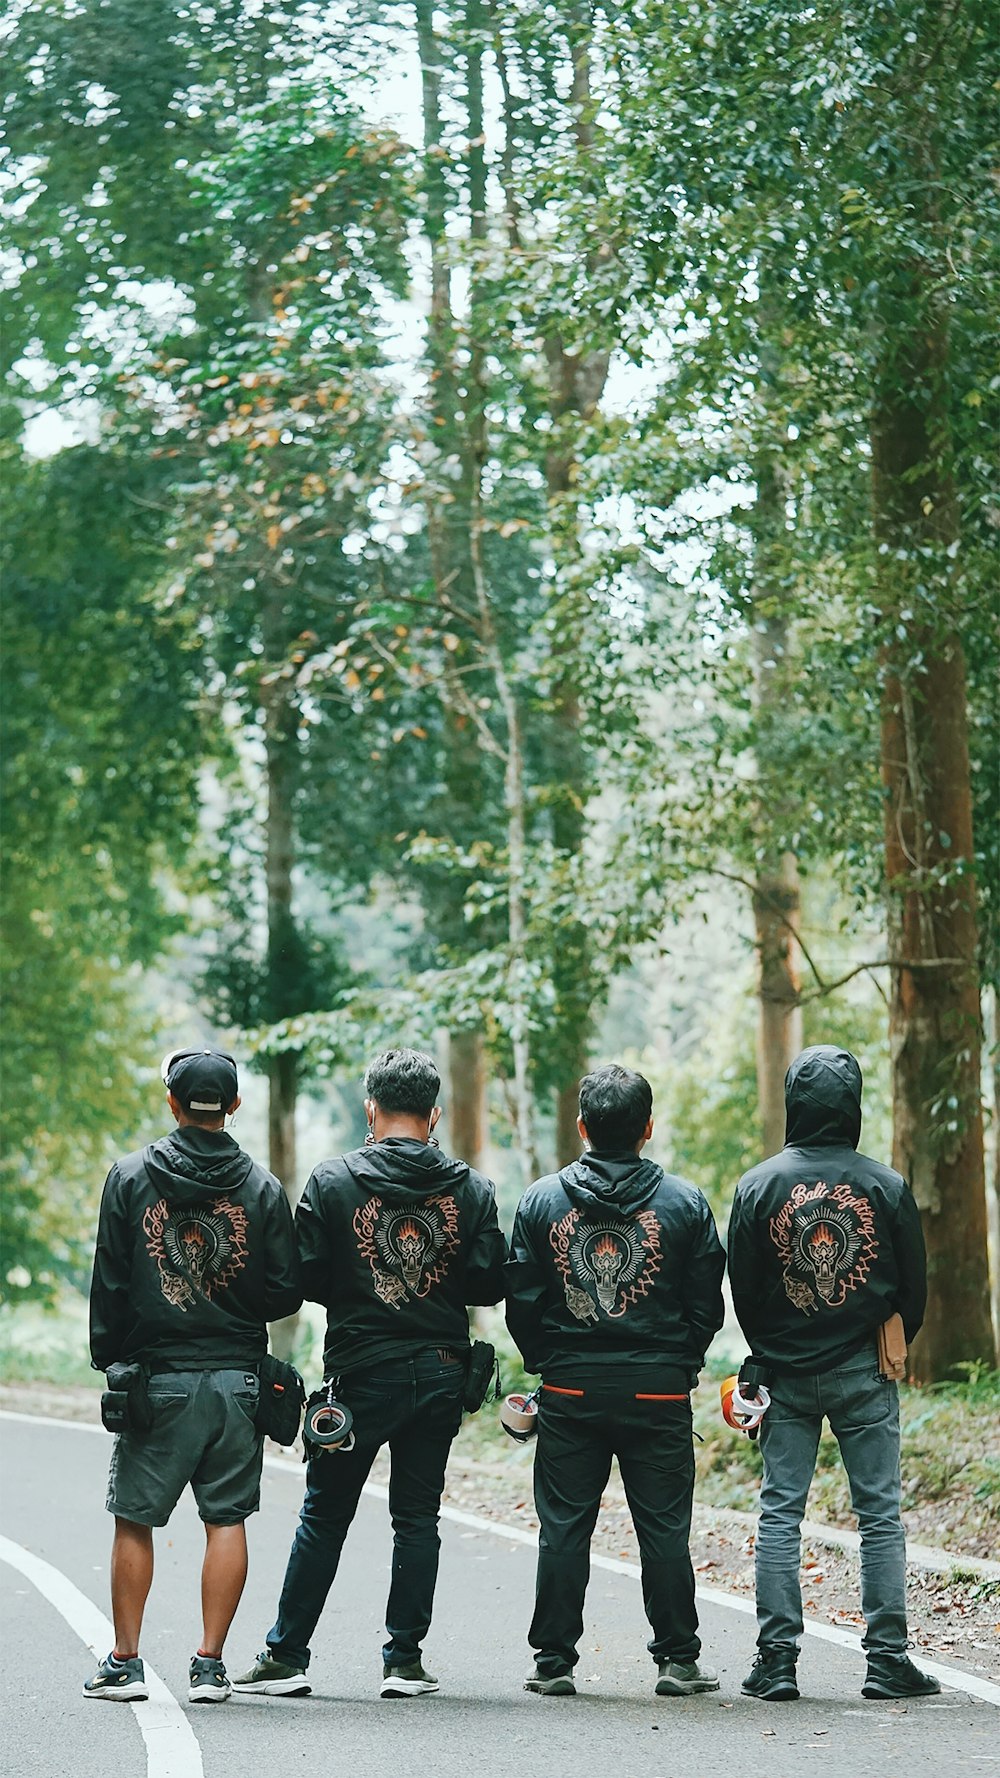 group of people in black and brown jackets standing in forest during daytime